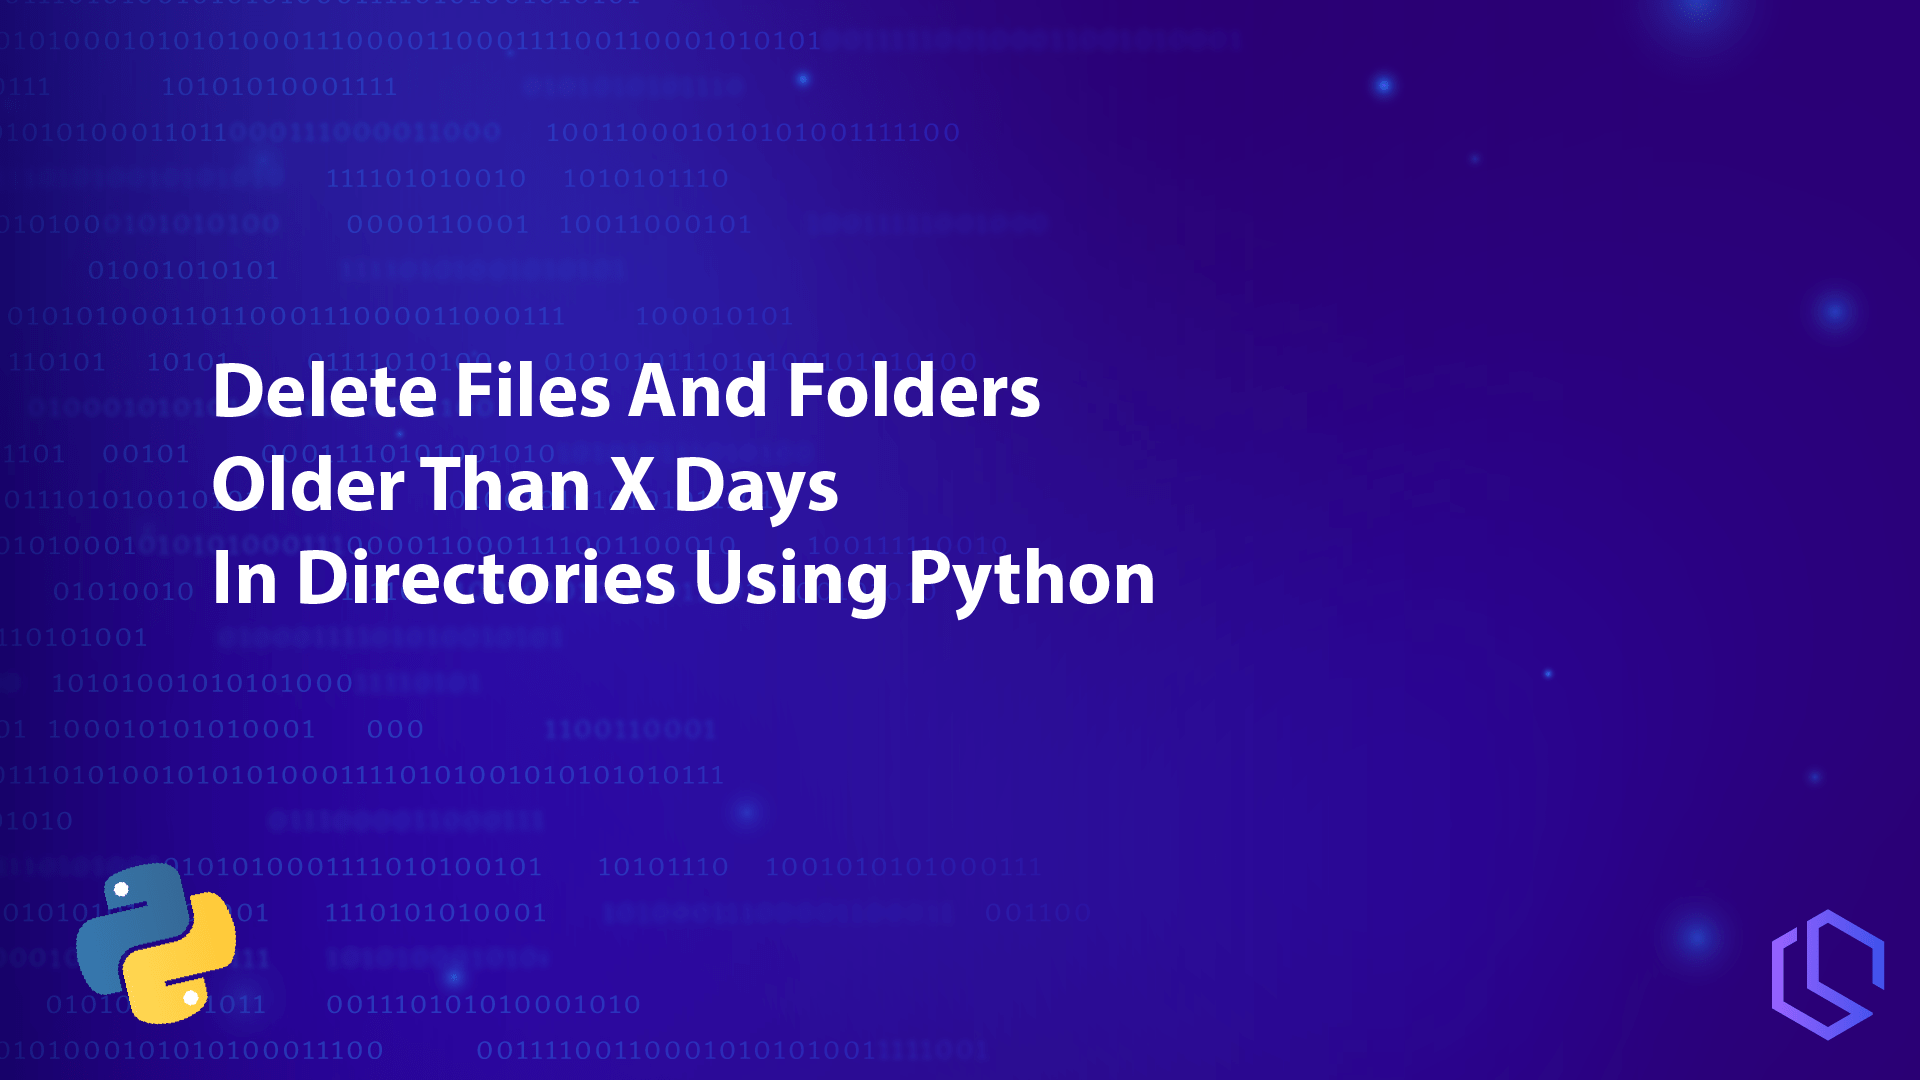 Delete files and folders older than X days in directories using Python